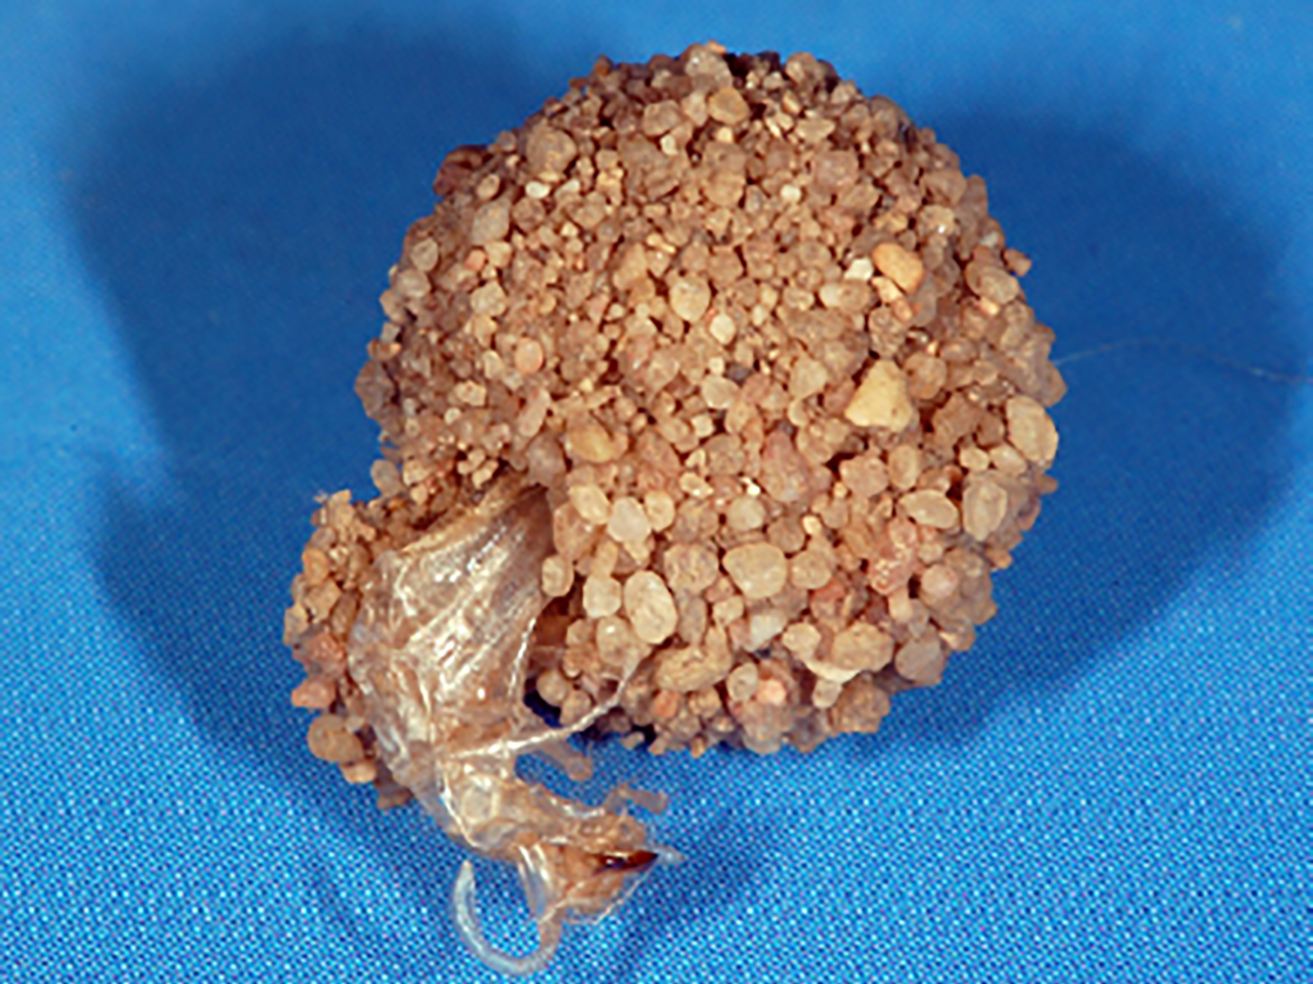 Fig. 10. Antlion adult emerging from pupal case.